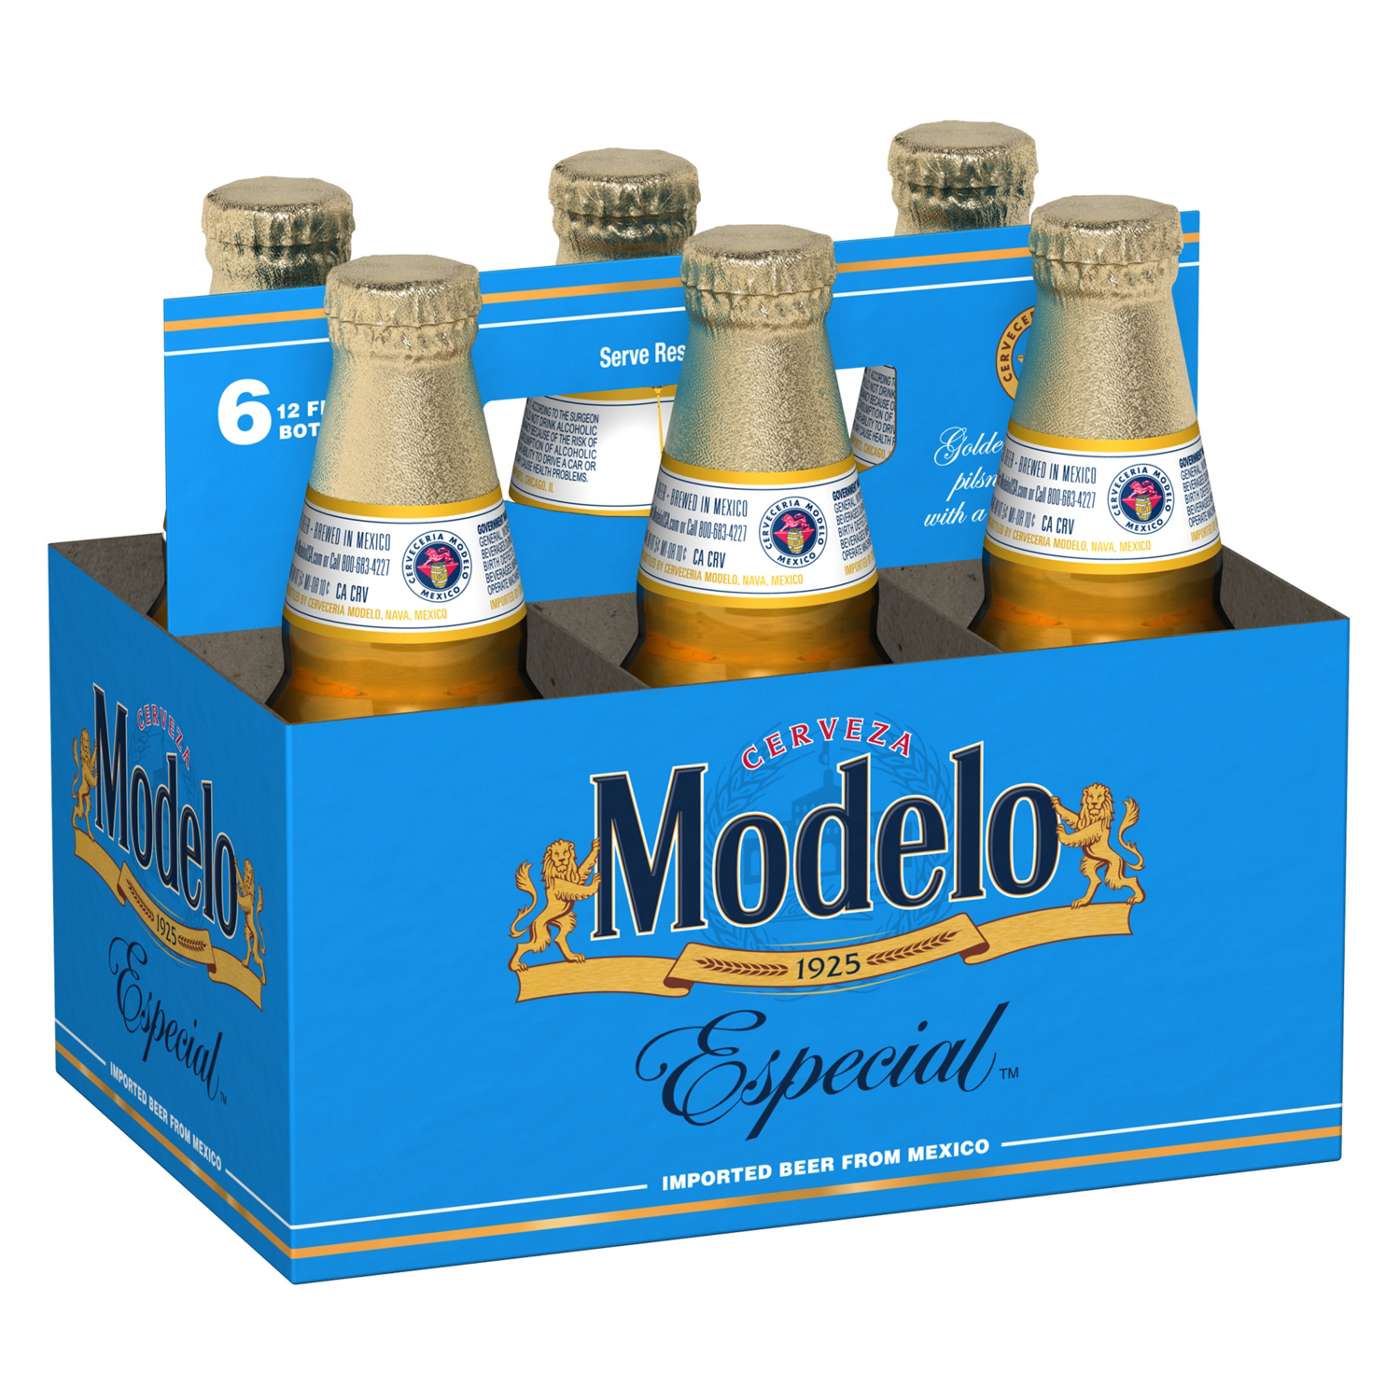 Modelo Especial Mexican Lager Import Beer 12 oz Bottles, 6 pk; image 1 of 10